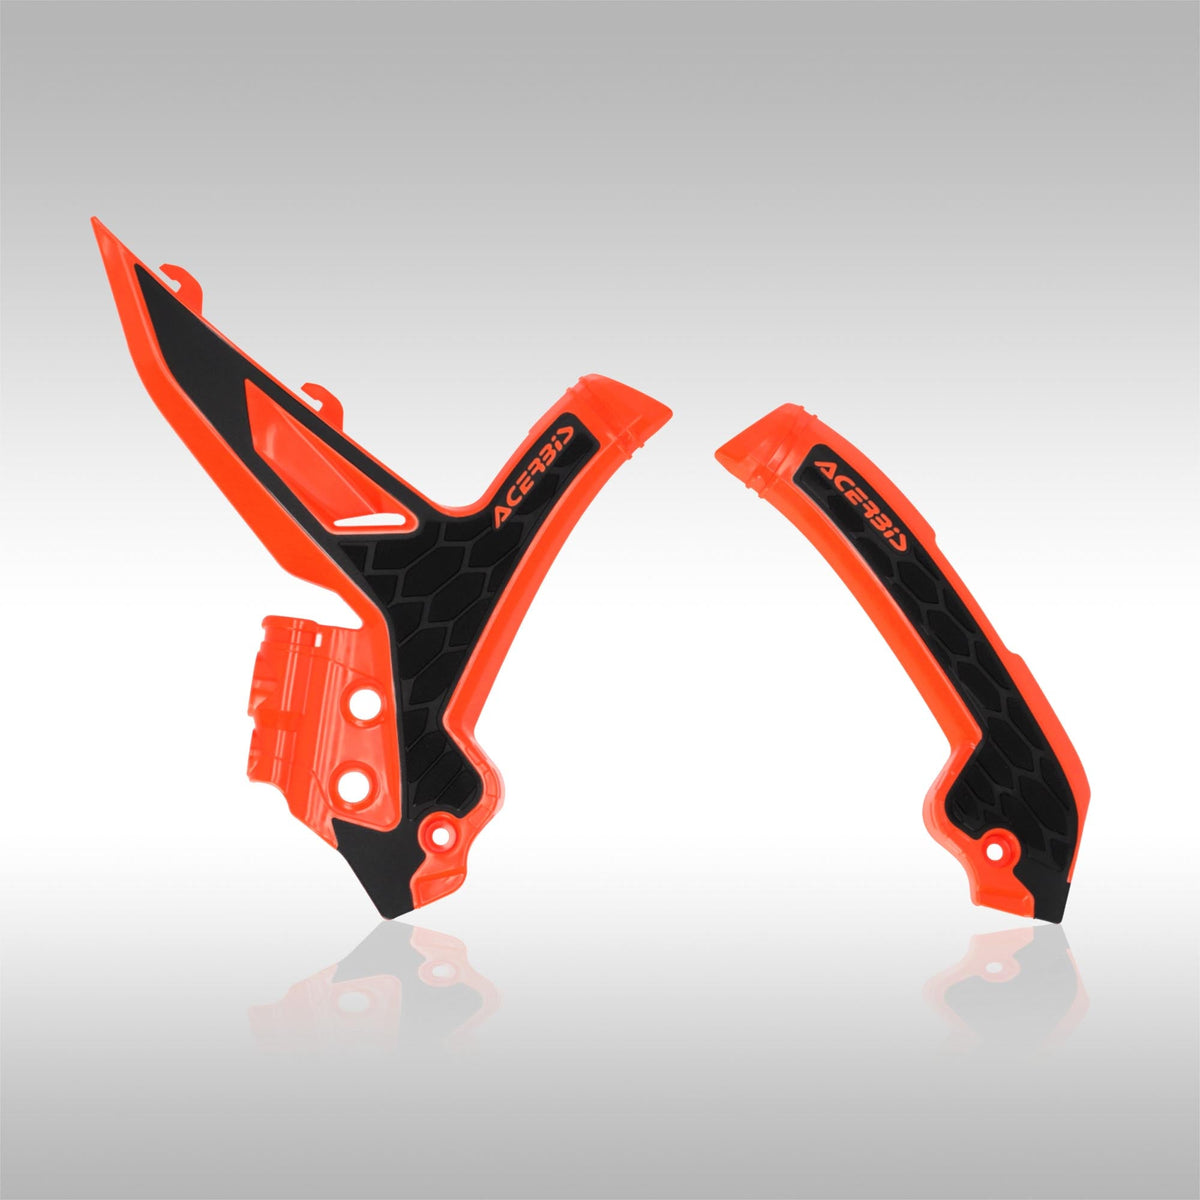 Acerbis X-Frame Protectors for the new generation of KTM dirtbikes and dualsport machines. Protect the frame and increase grip and control all with one part. Dirtbike frame guard in orange / black.